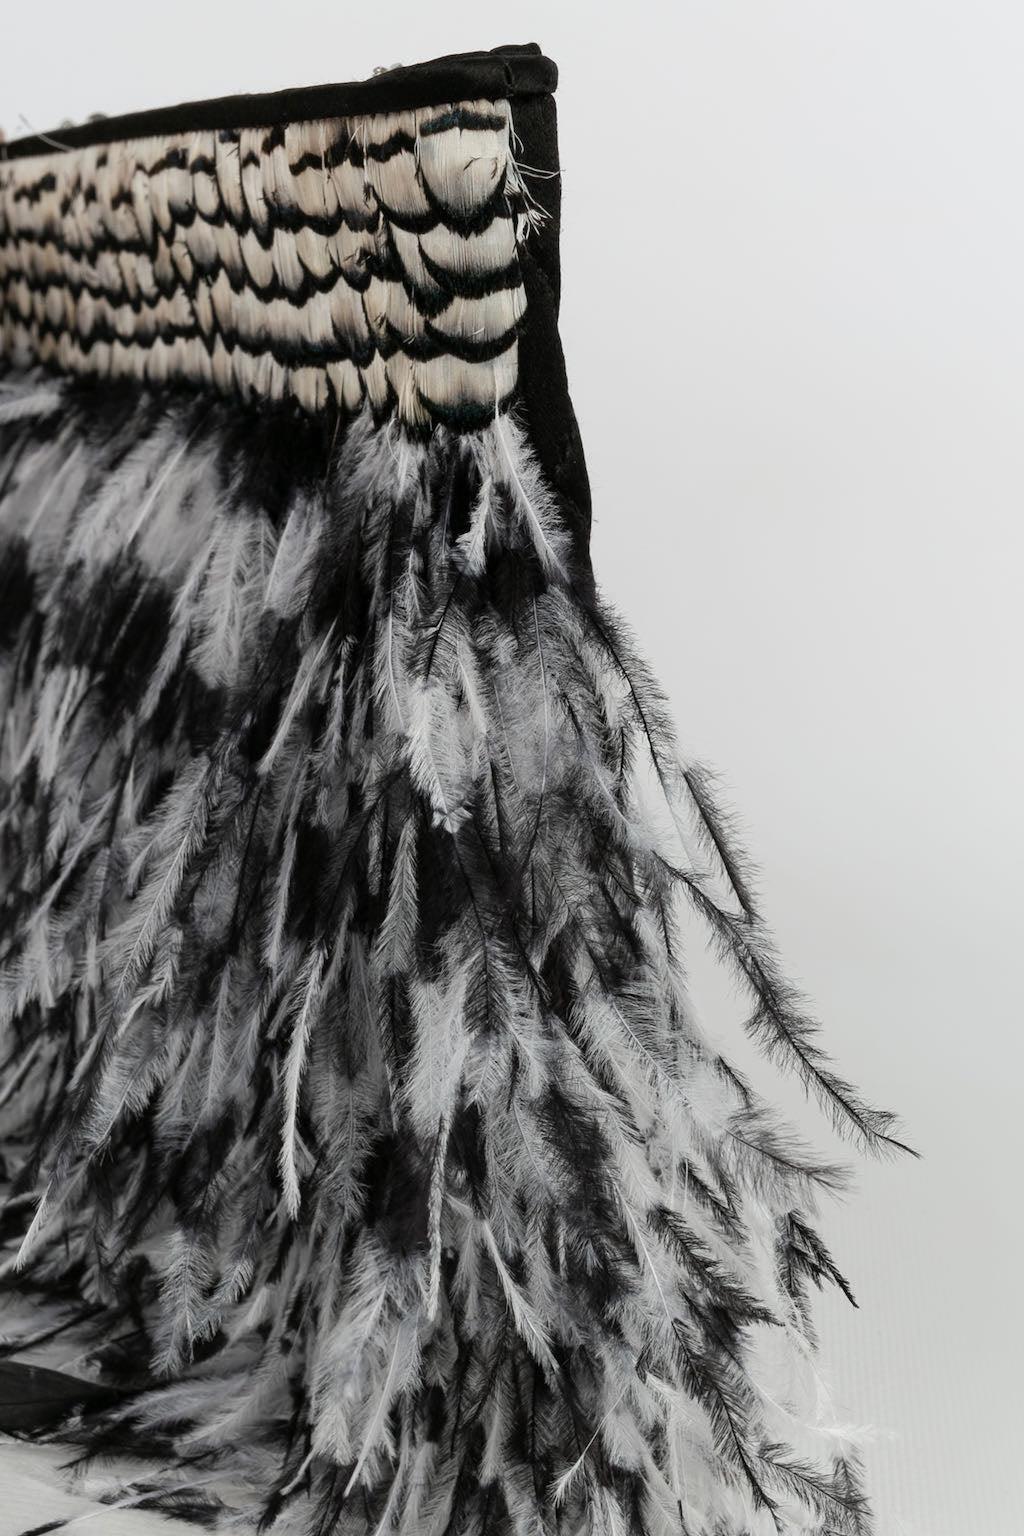 Women's Chanel Clutch Silk Bag in Black and White Feathers, 2011 For Sale